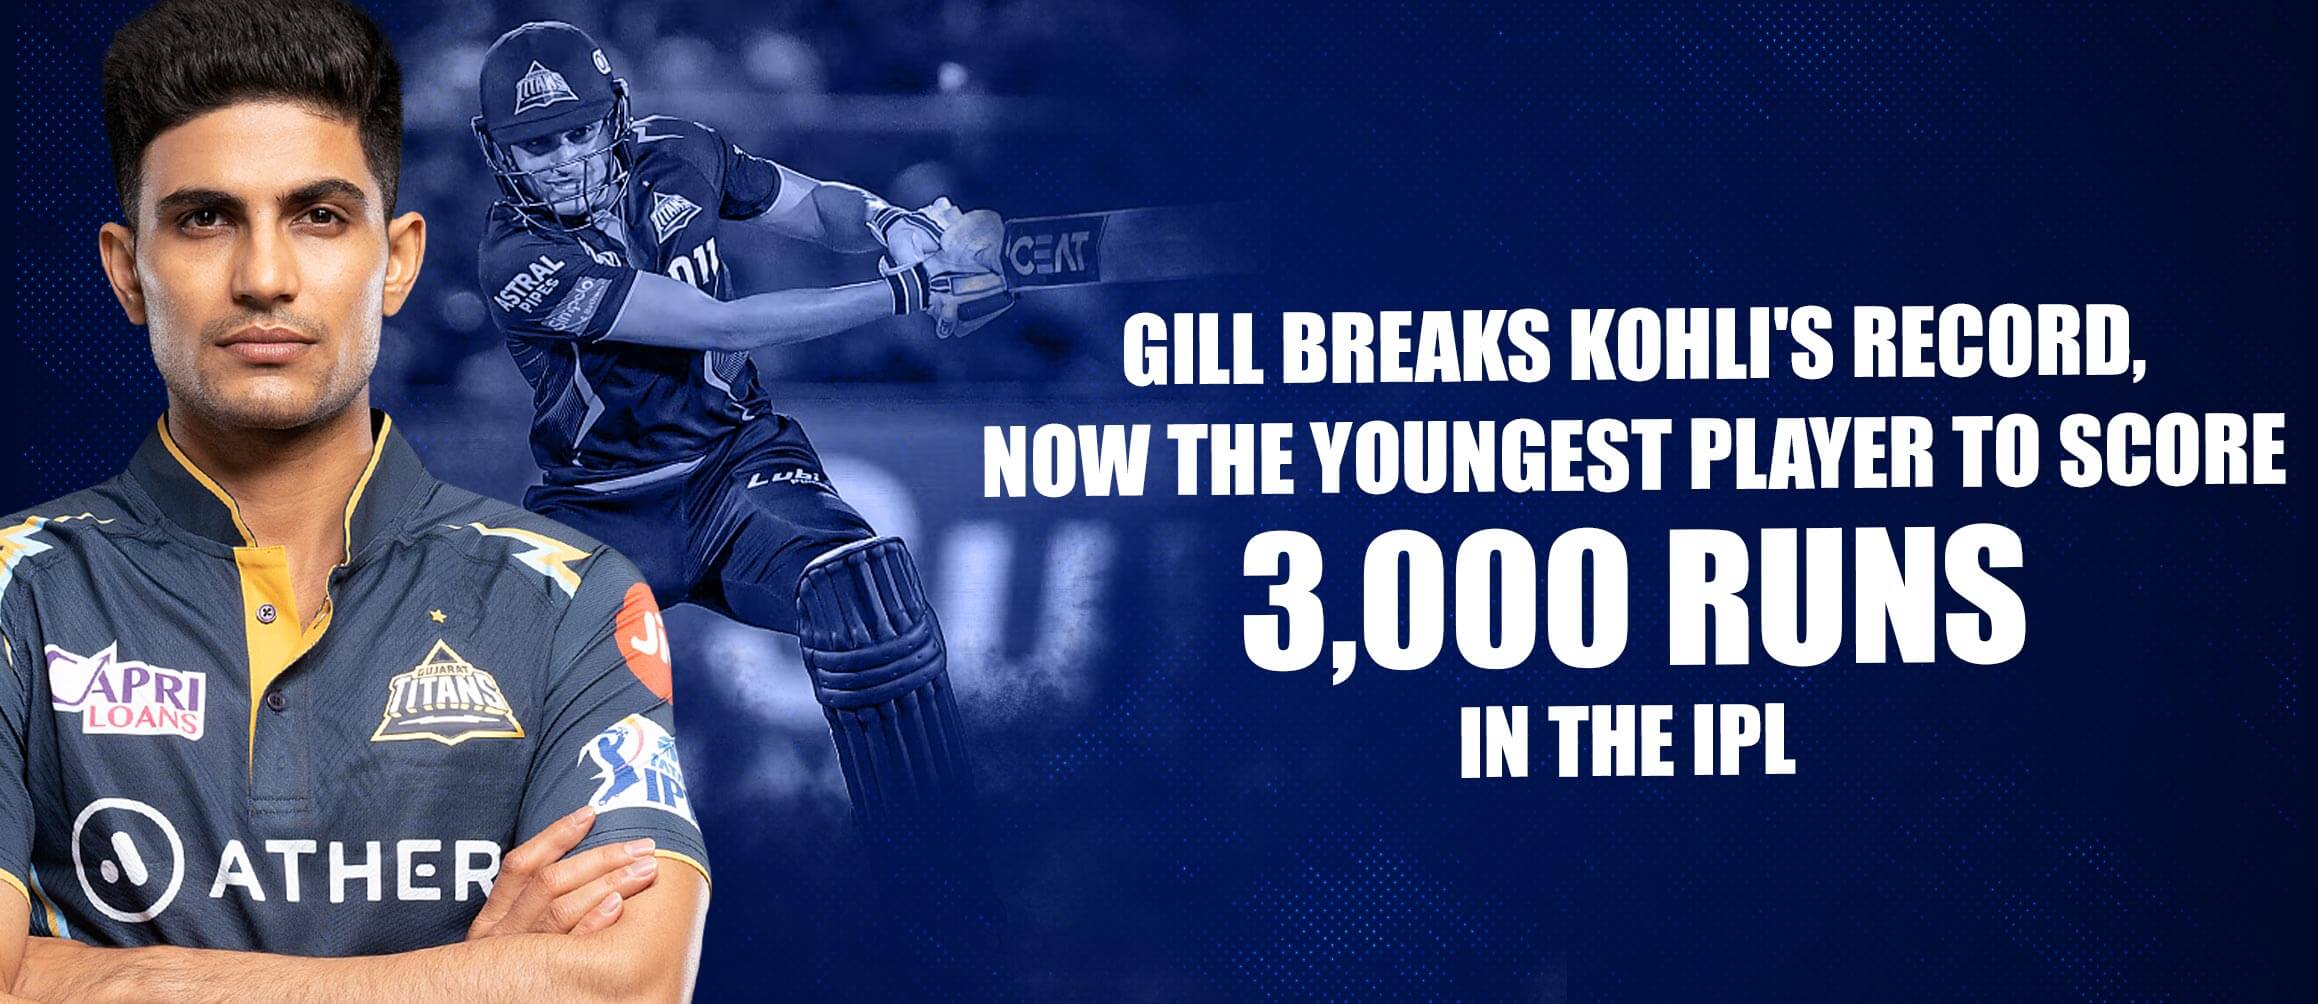 Gill Breaks Kohli’s Record, now the youngest player to score 3,000 runs in the IPL